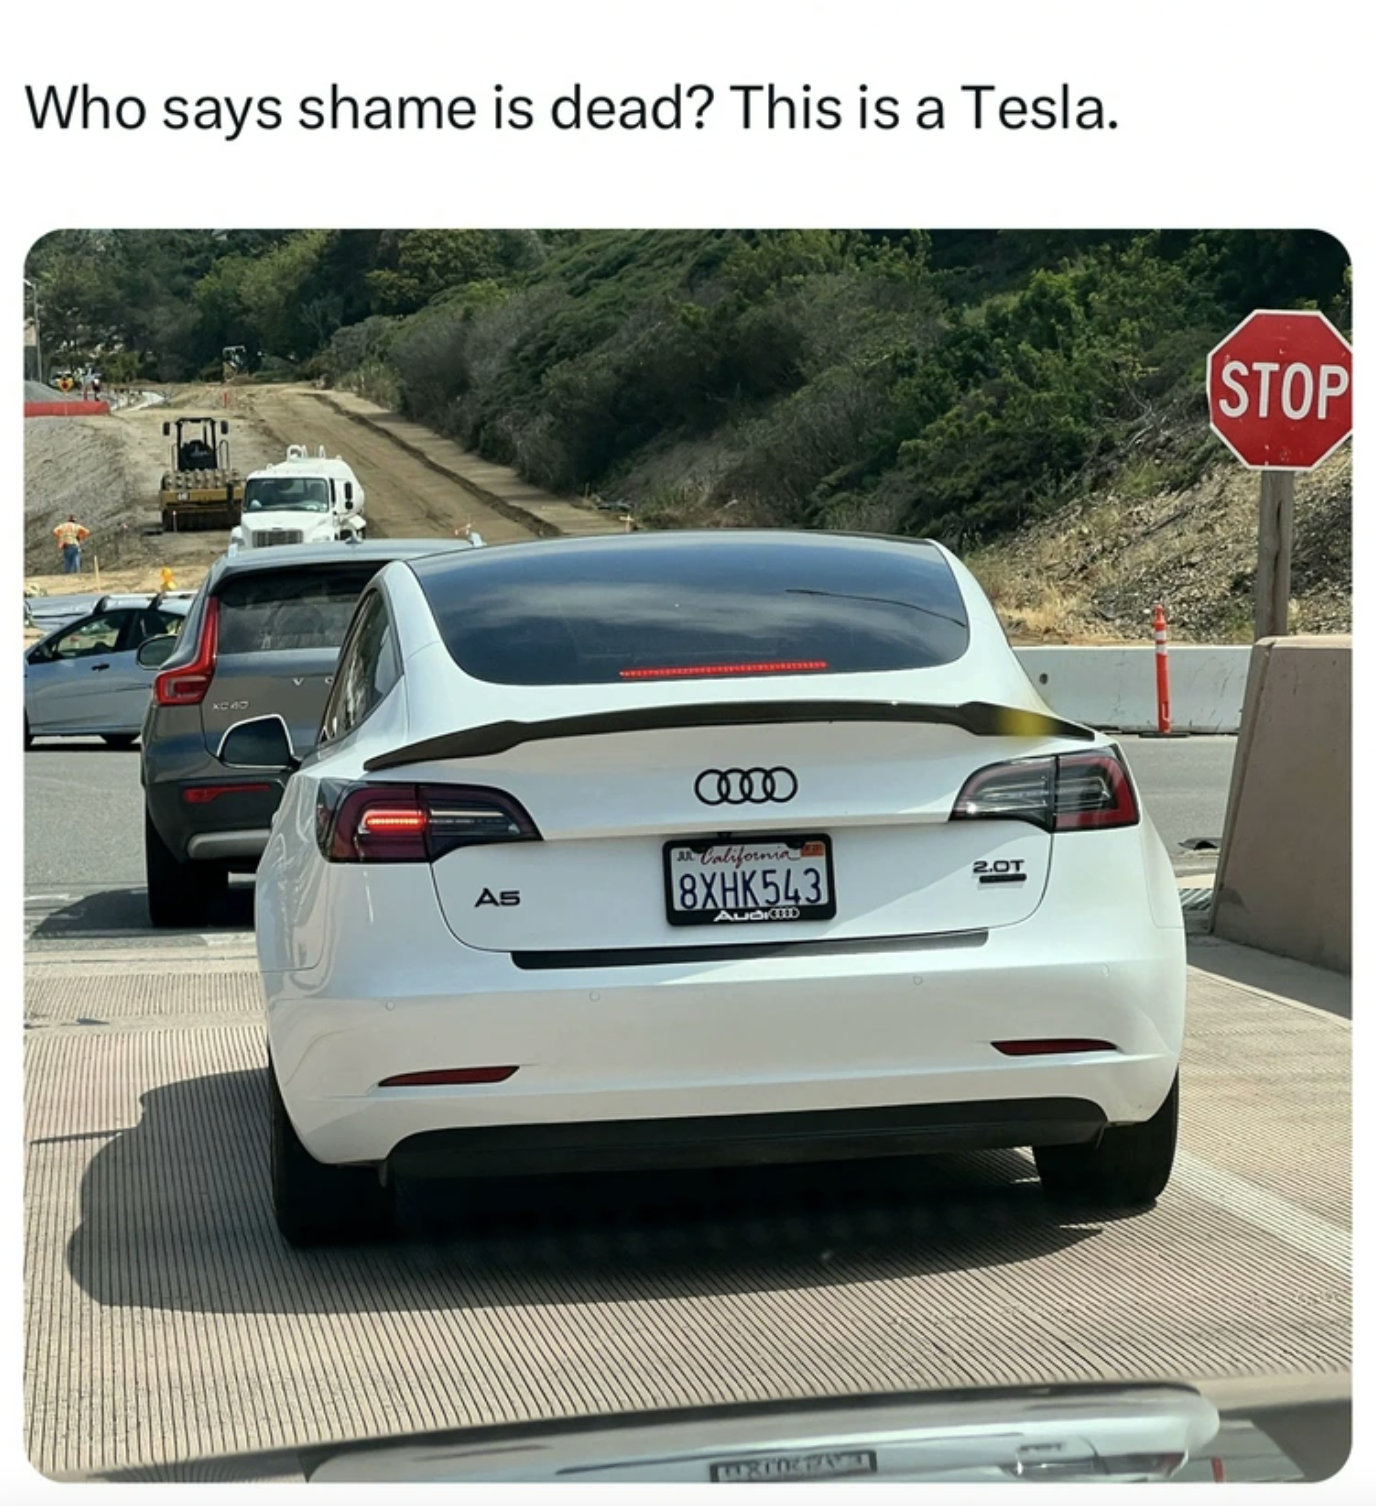 Car - Who says shame is dead? This is a Tesla. As 8XHK543 Stop